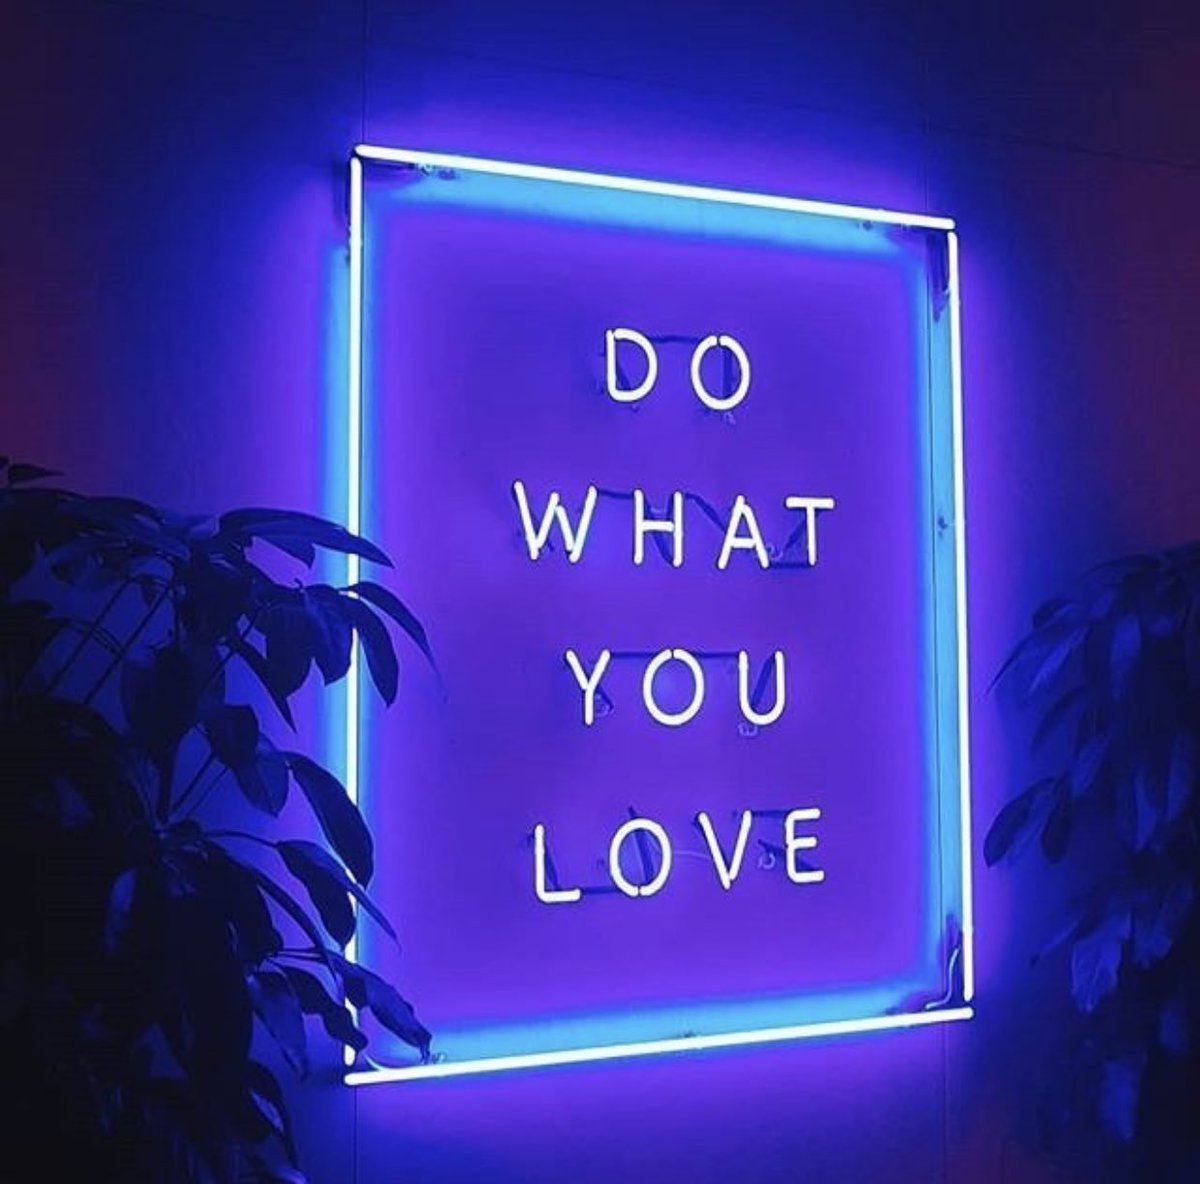 Do what you love, is no longer just advice